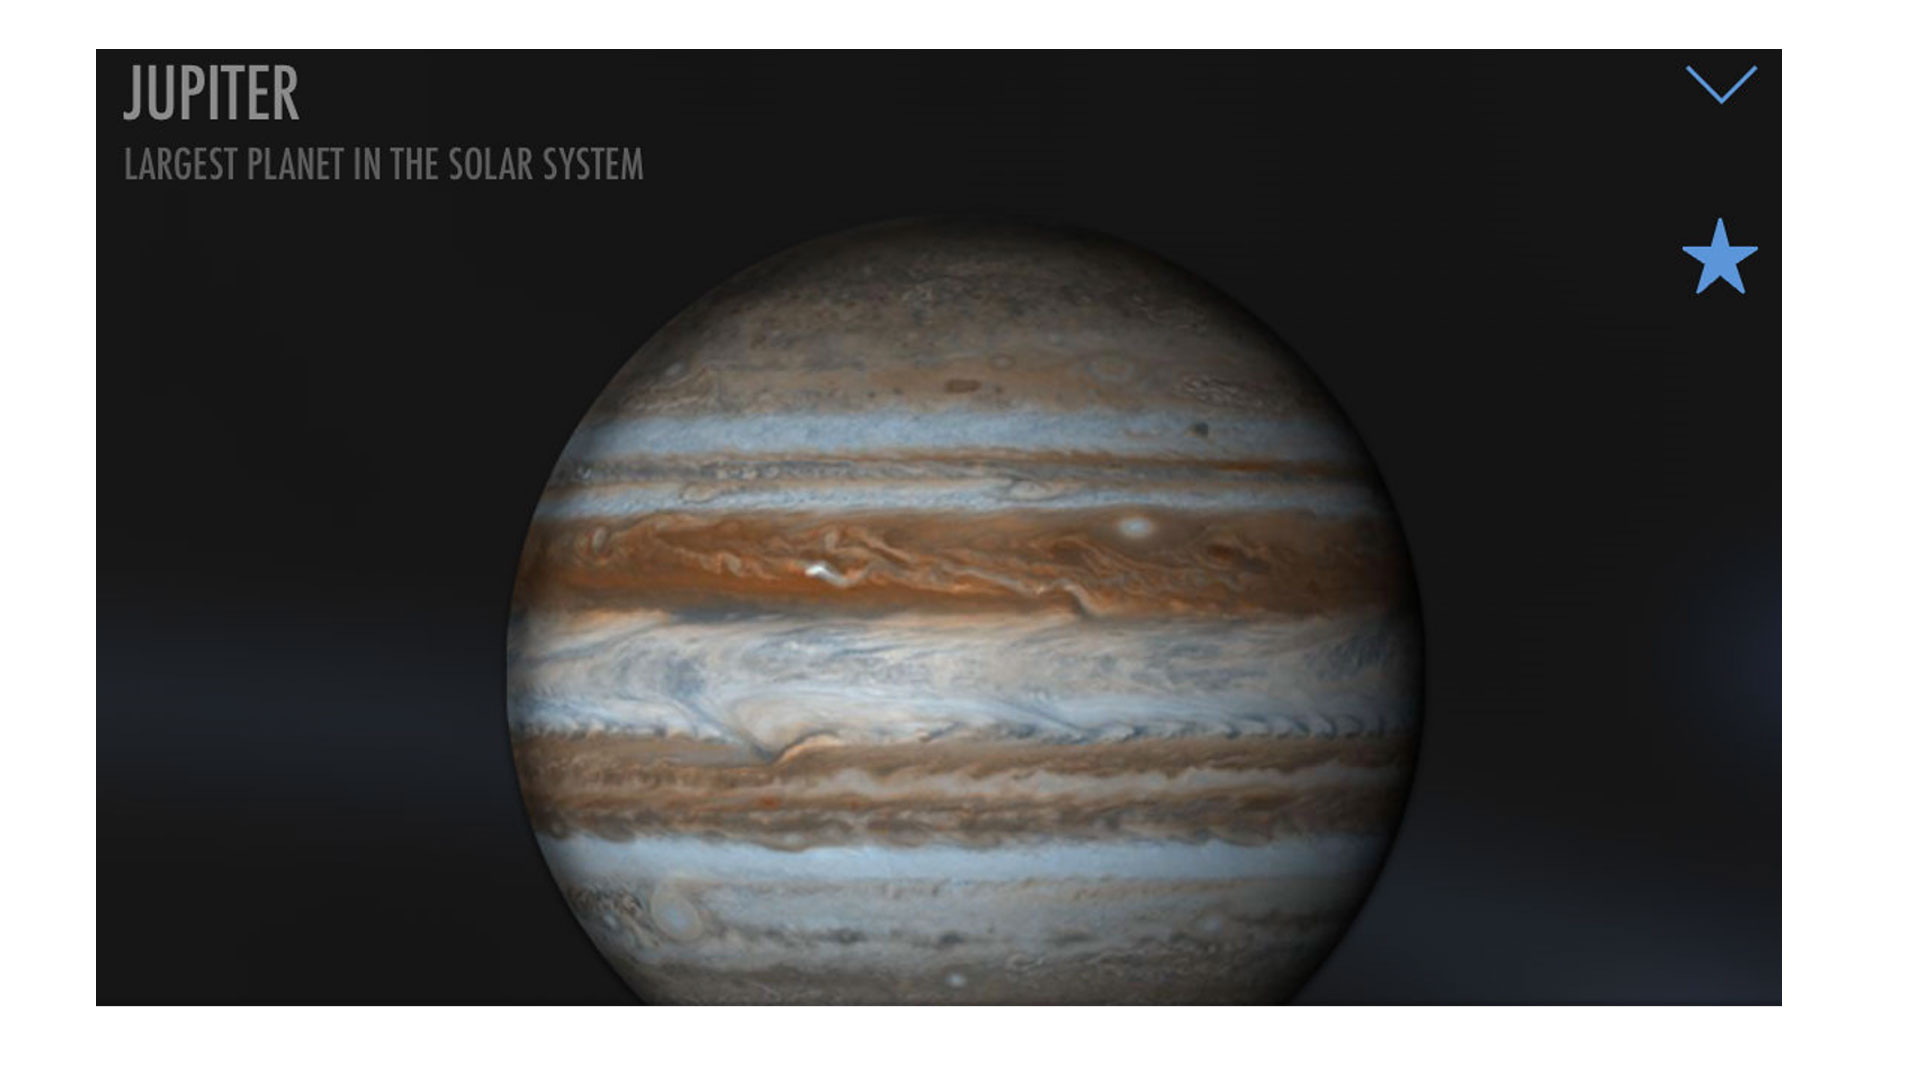 SkyView review: Image shows Jupiter.